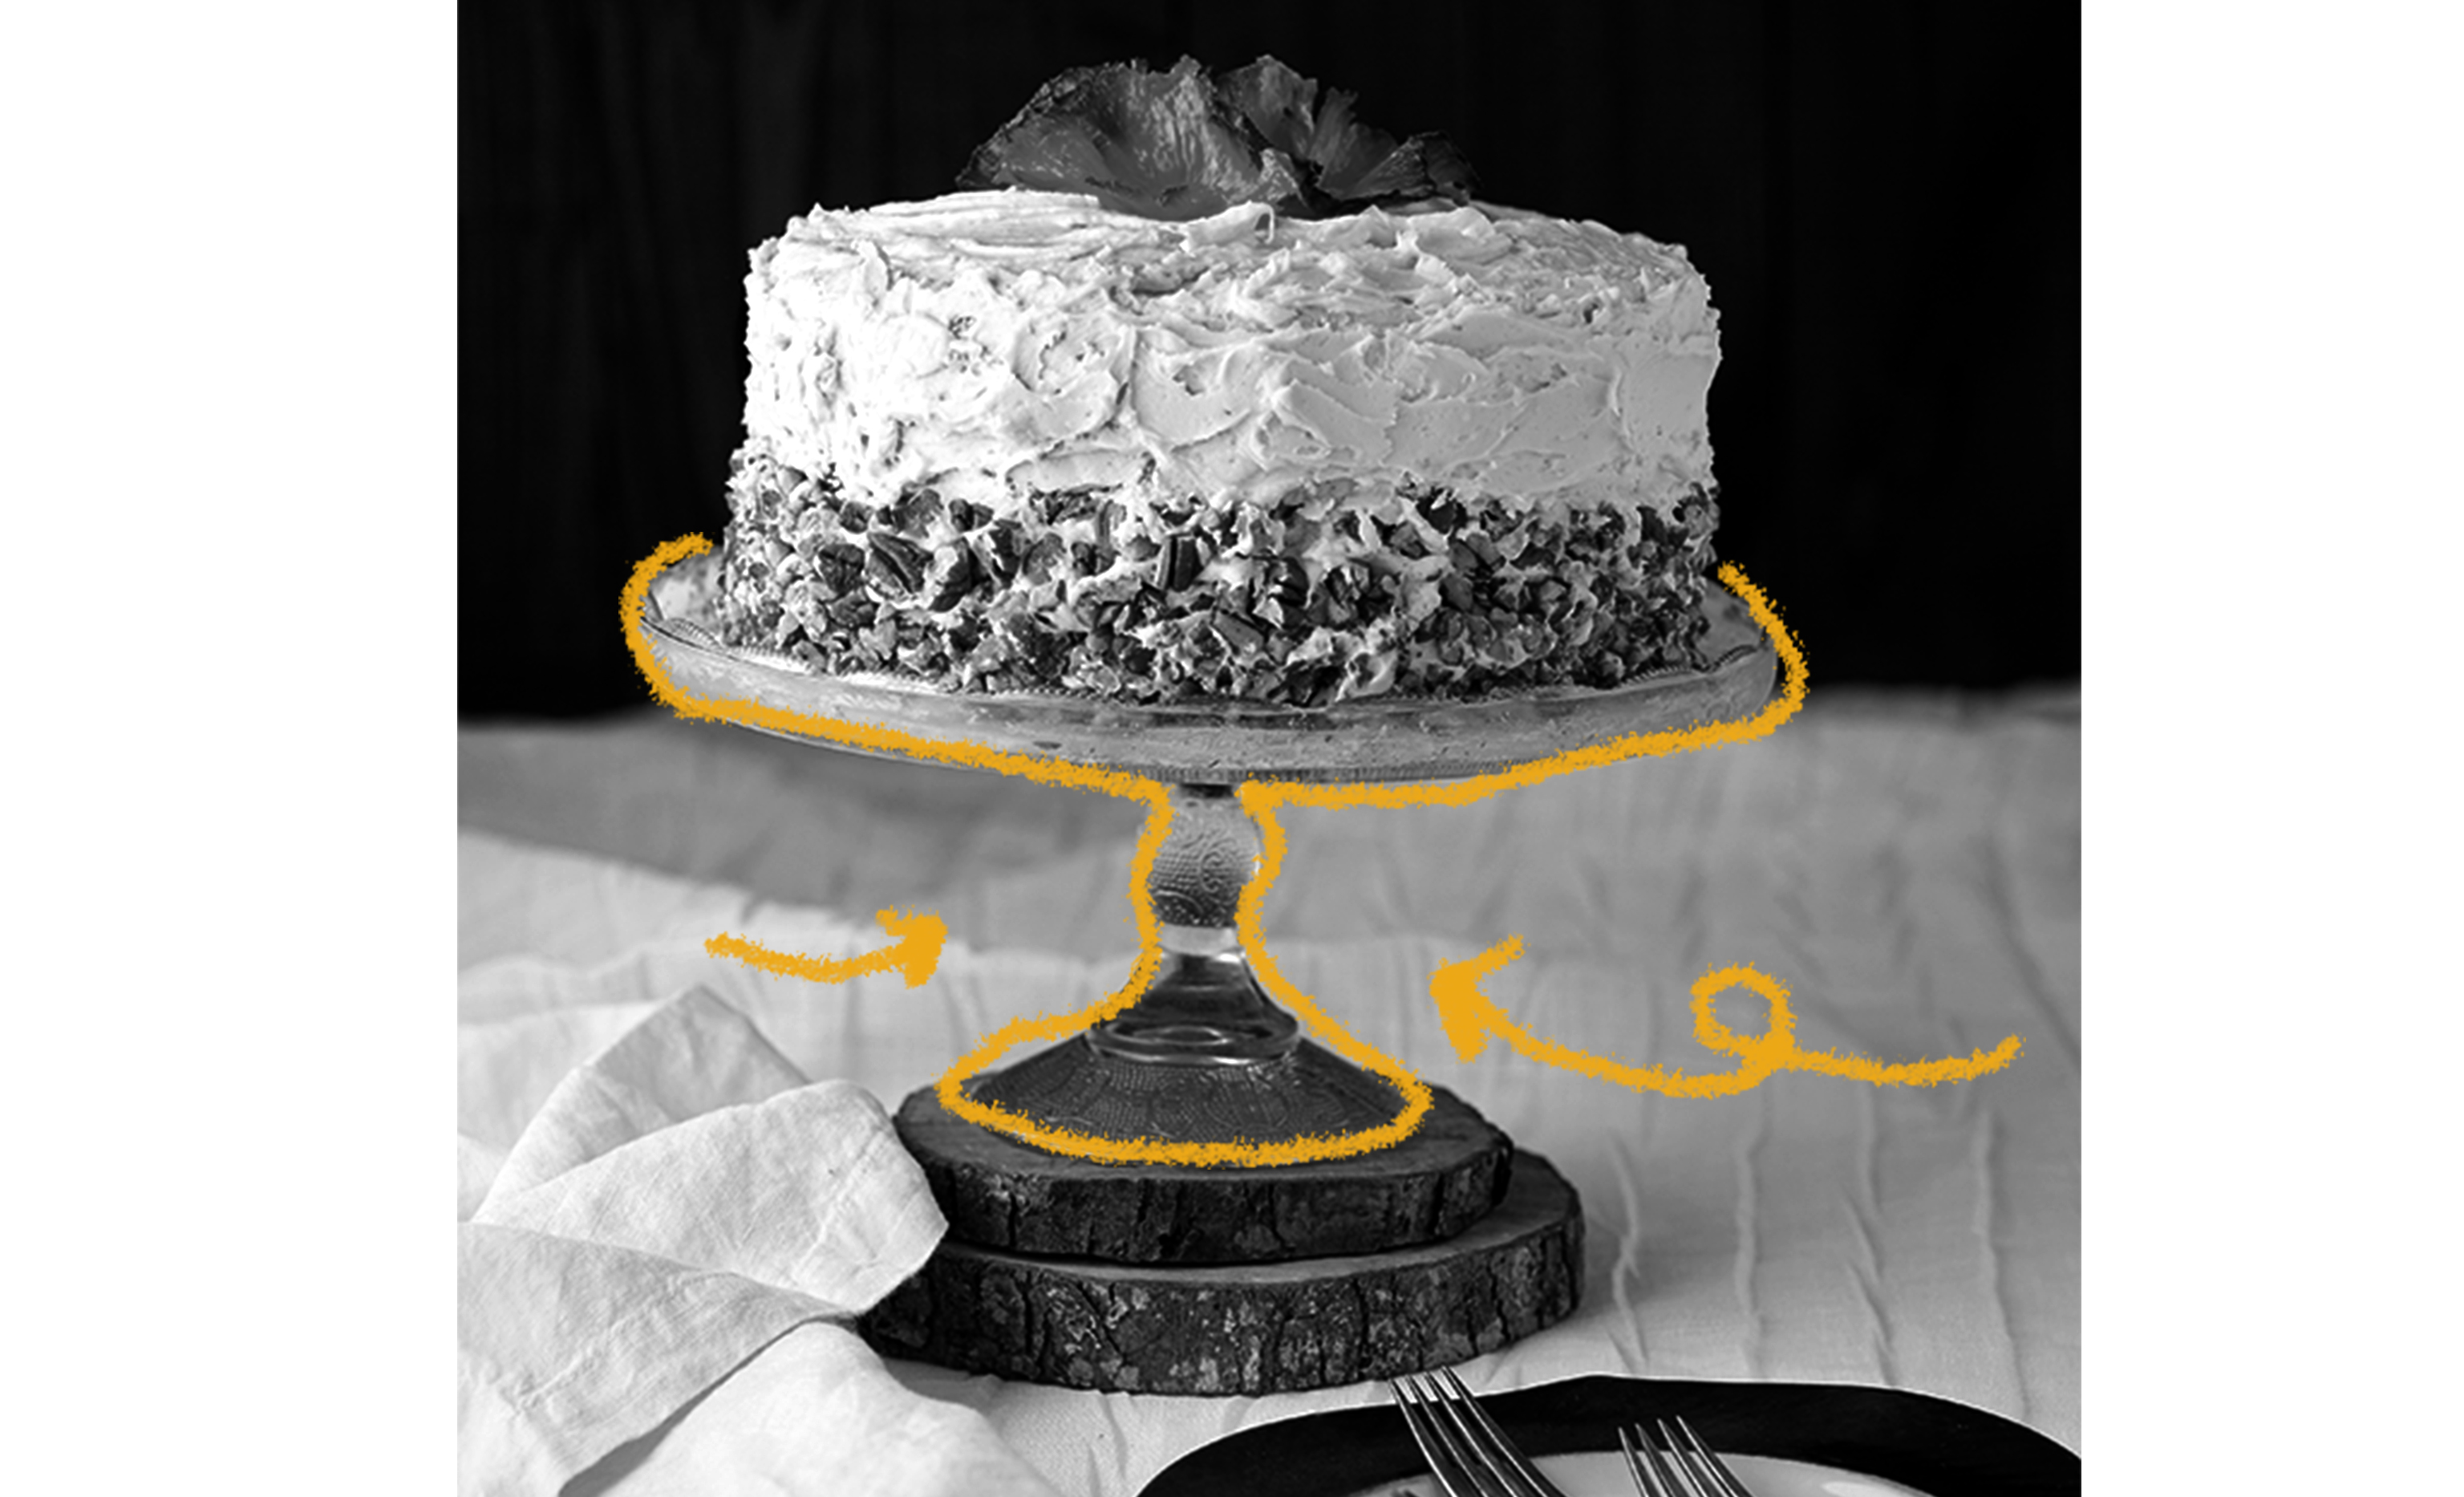 The History of Glass Cake Plates